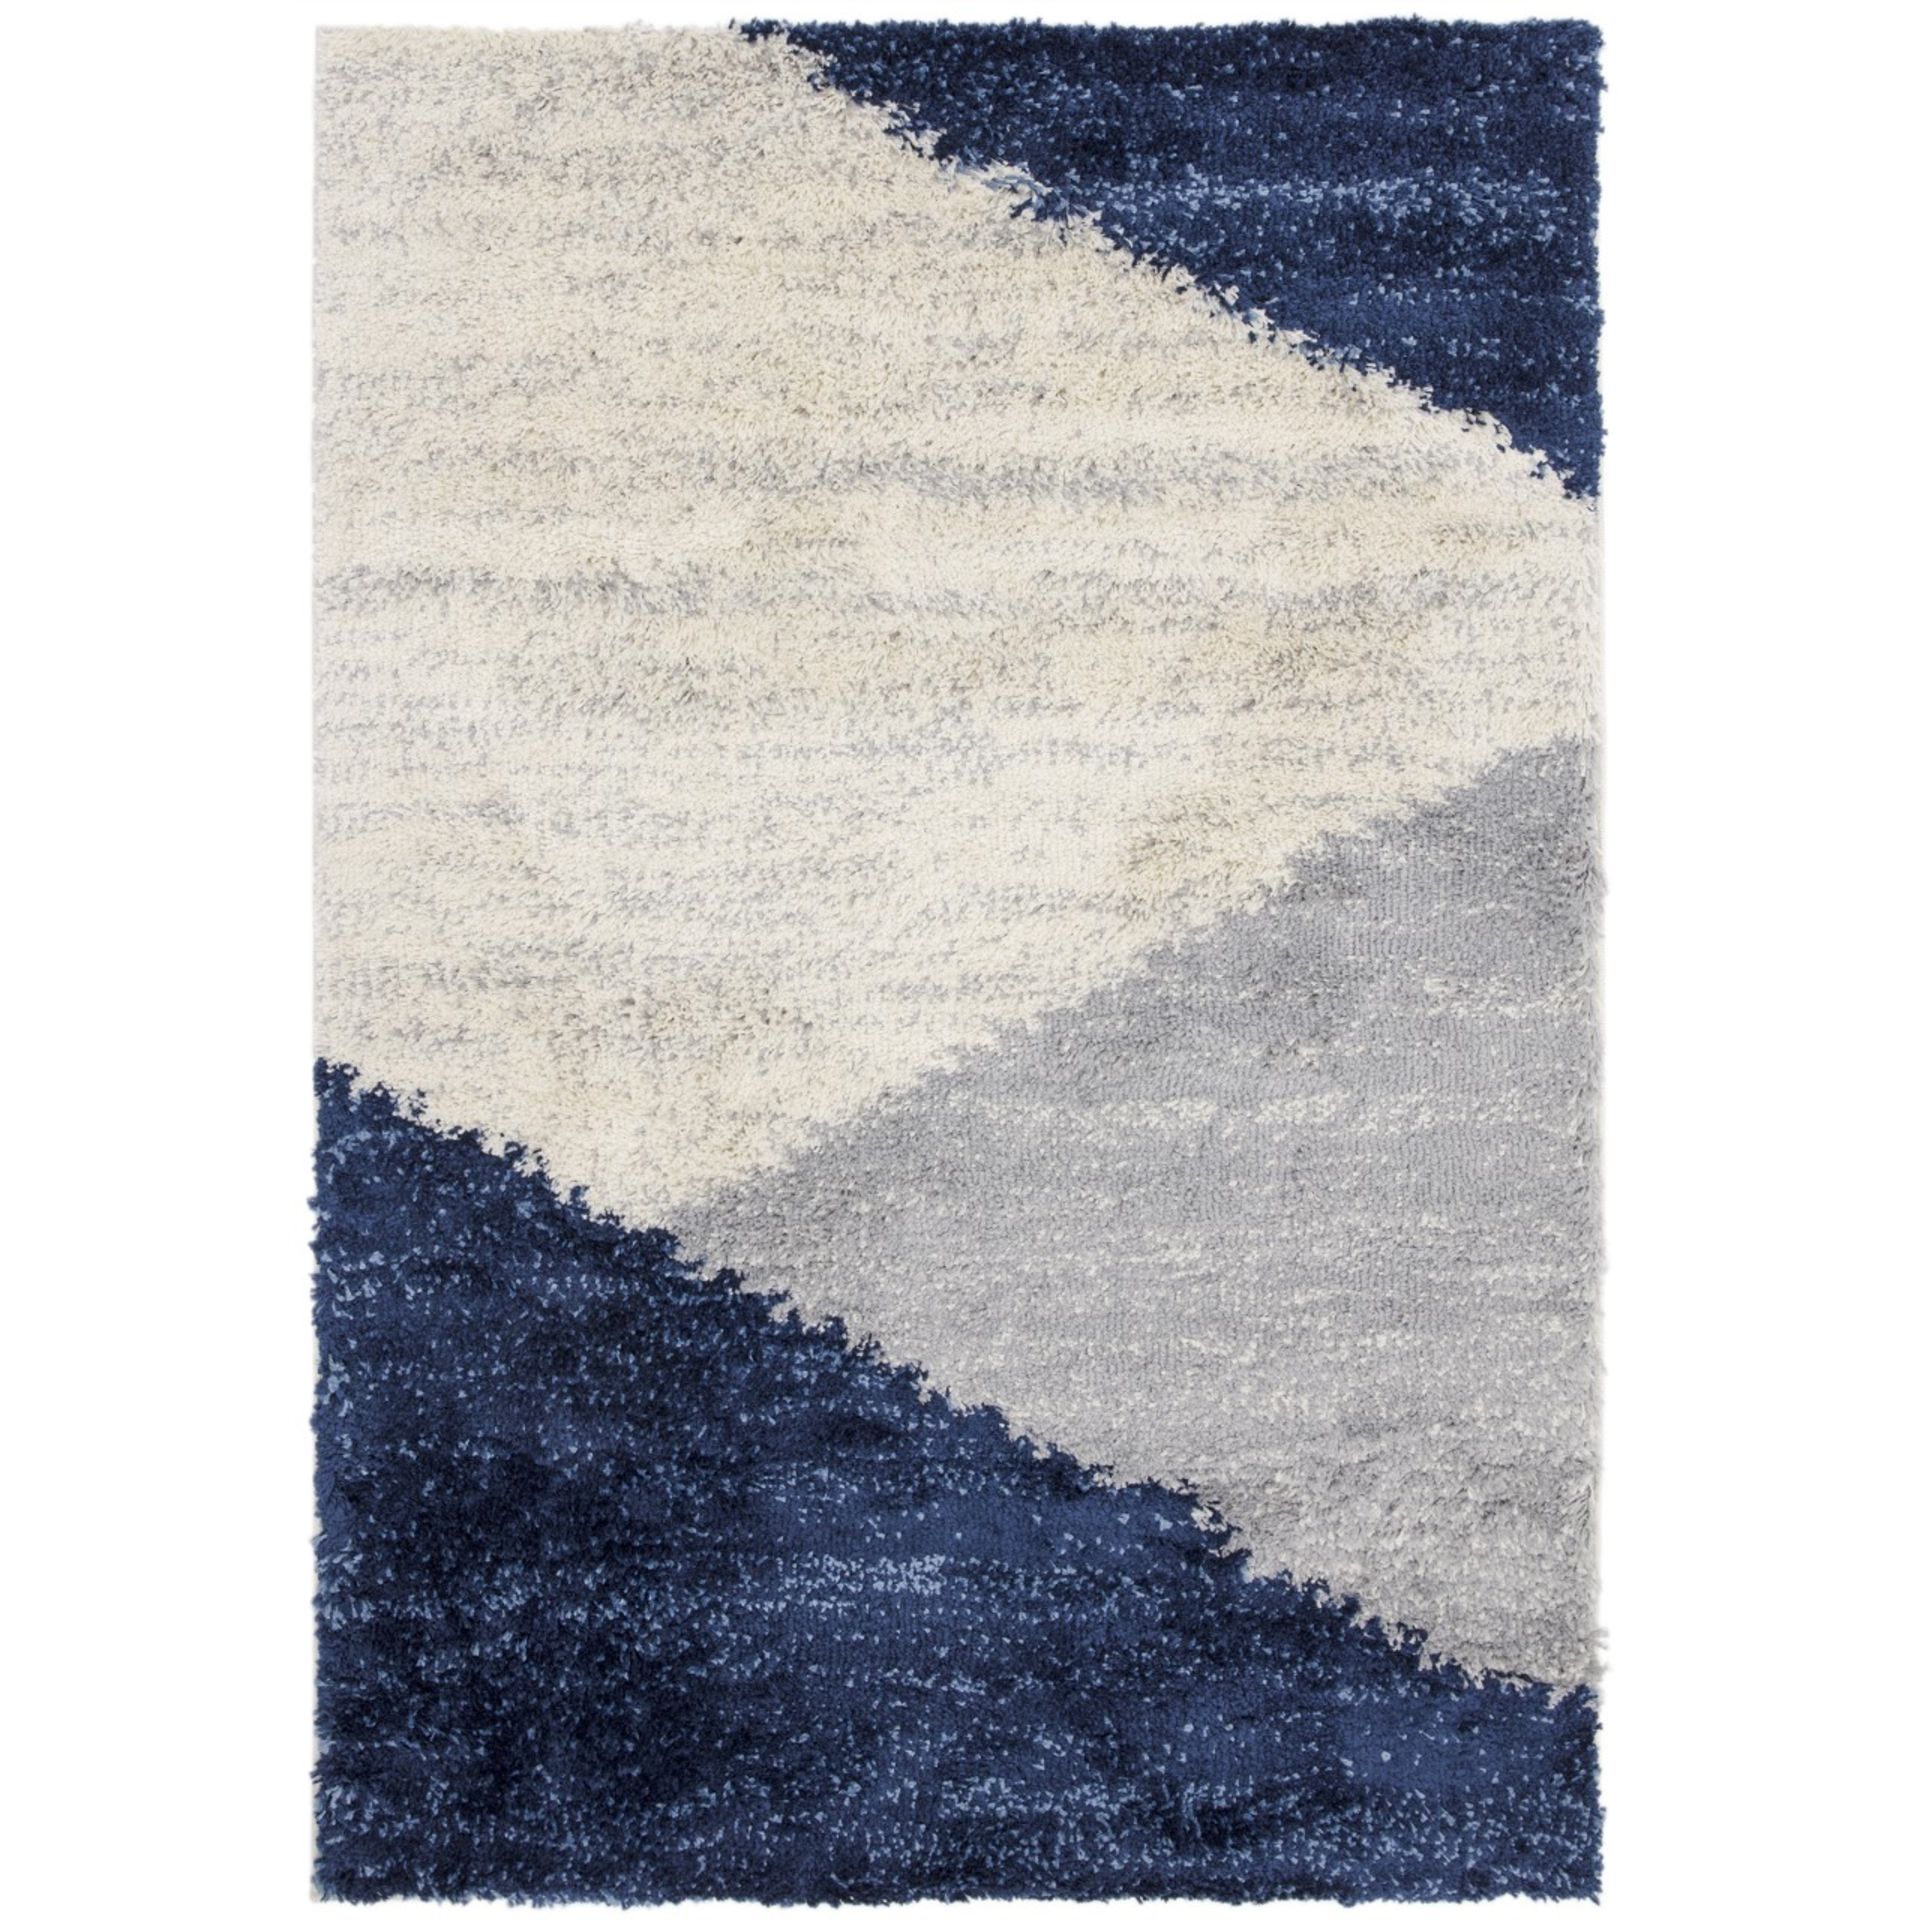 New Nordic 110x160cm Navy - 100% Polypropylene Rug - £10 Delivery - Image 2 of 3